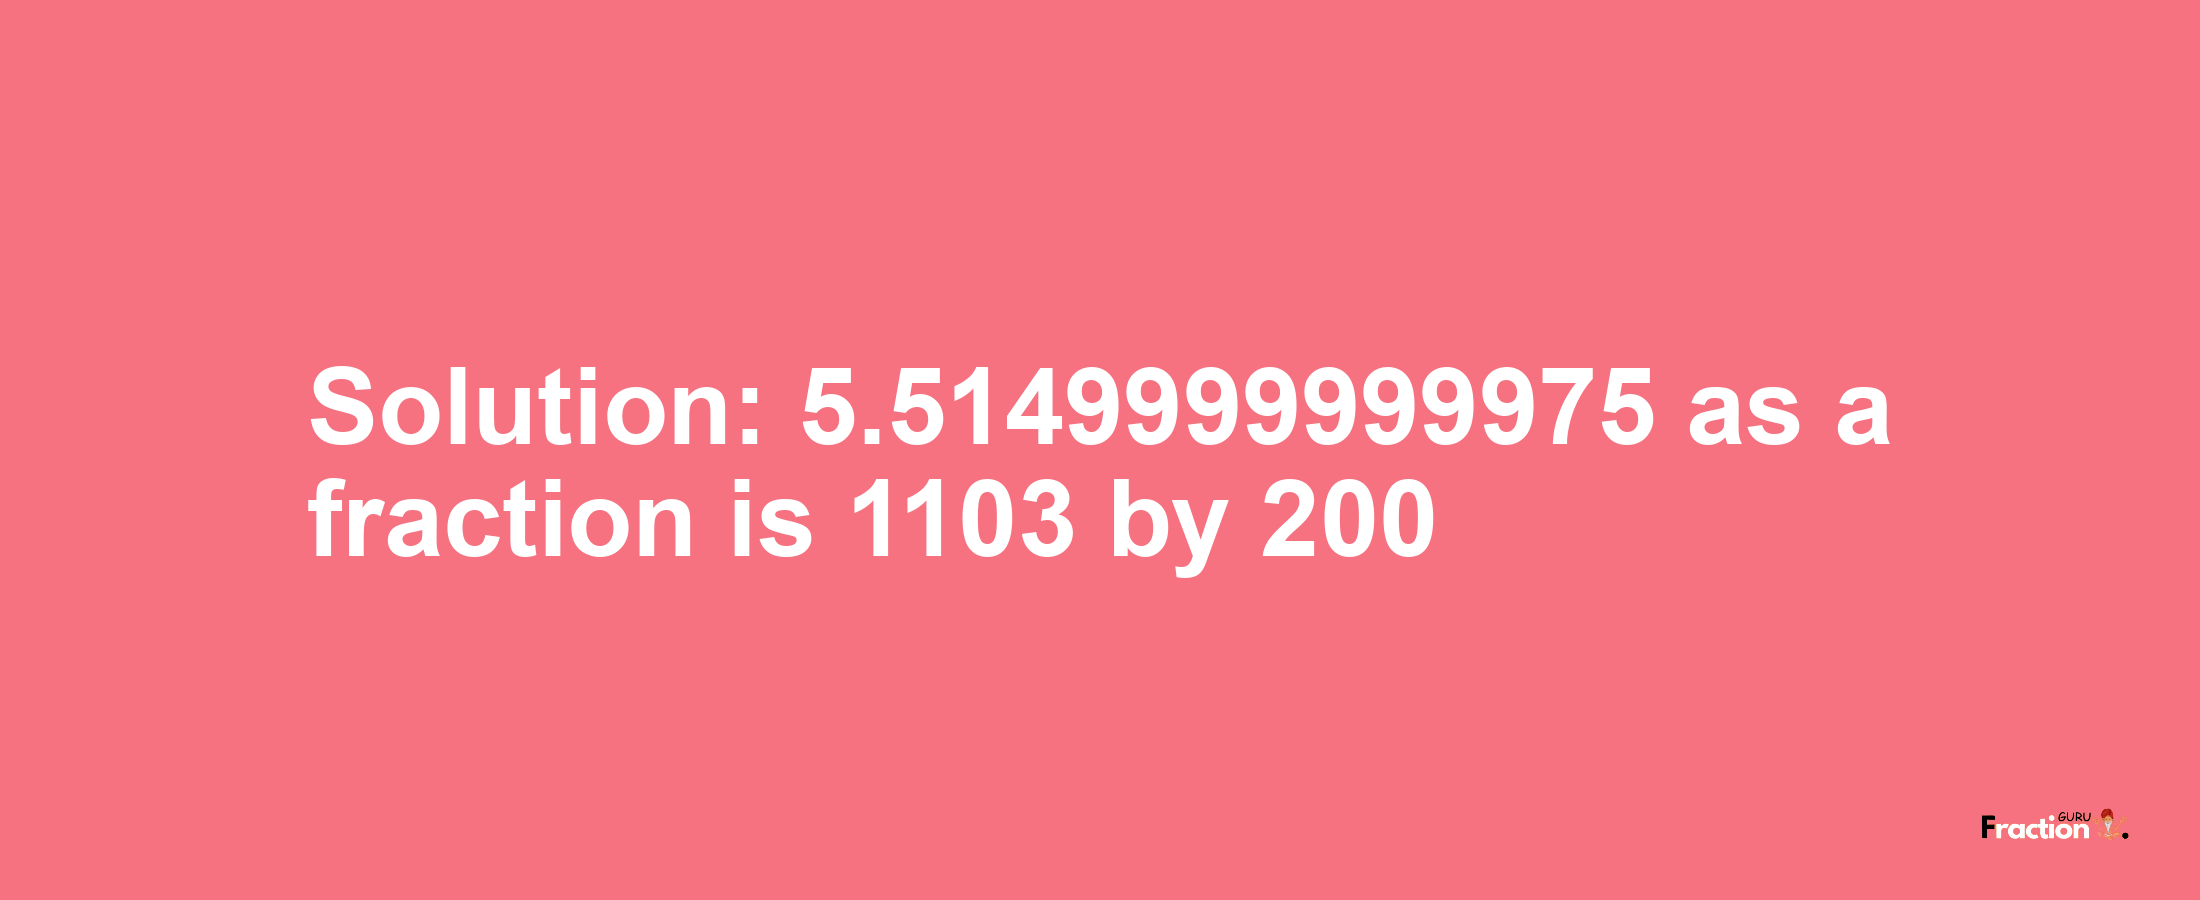 Solution:5.5149999999975 as a fraction is 1103/200